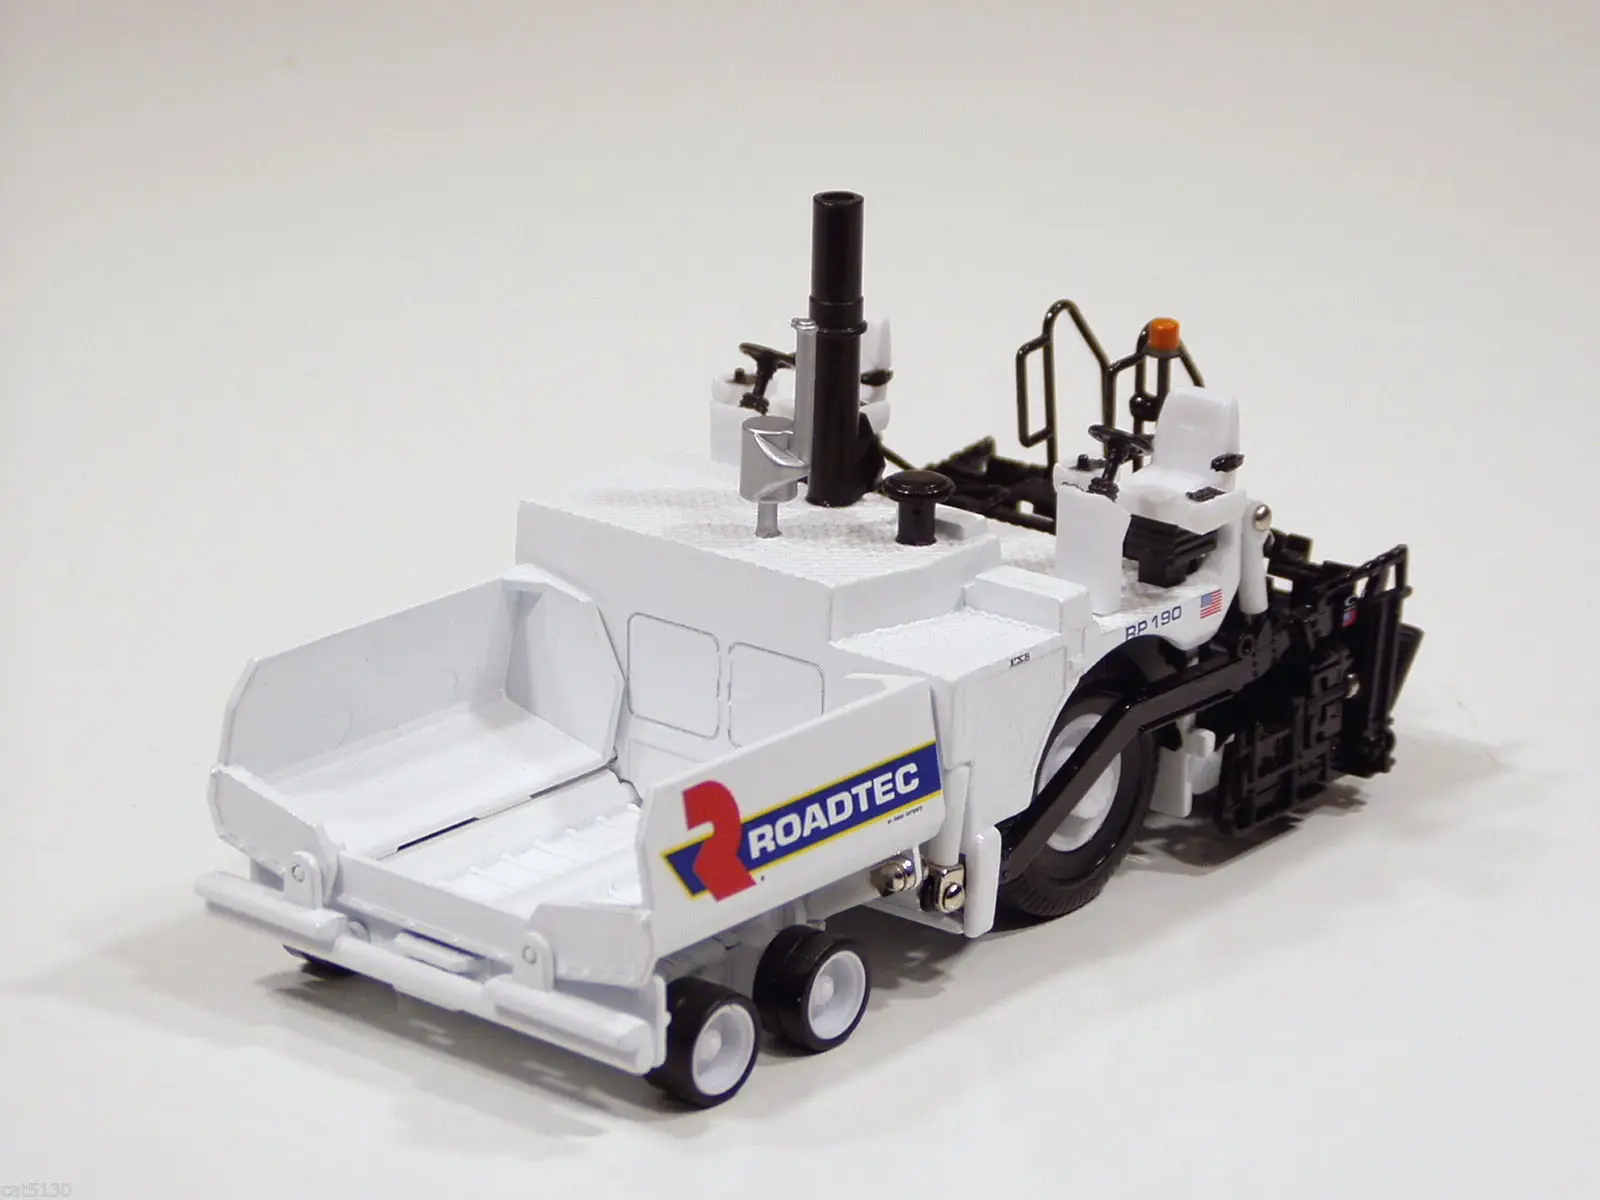 NEW 1:50 Norscot ROADTEC RP190 RP 190 ROAD PAVER DieCast Model Toy 584374